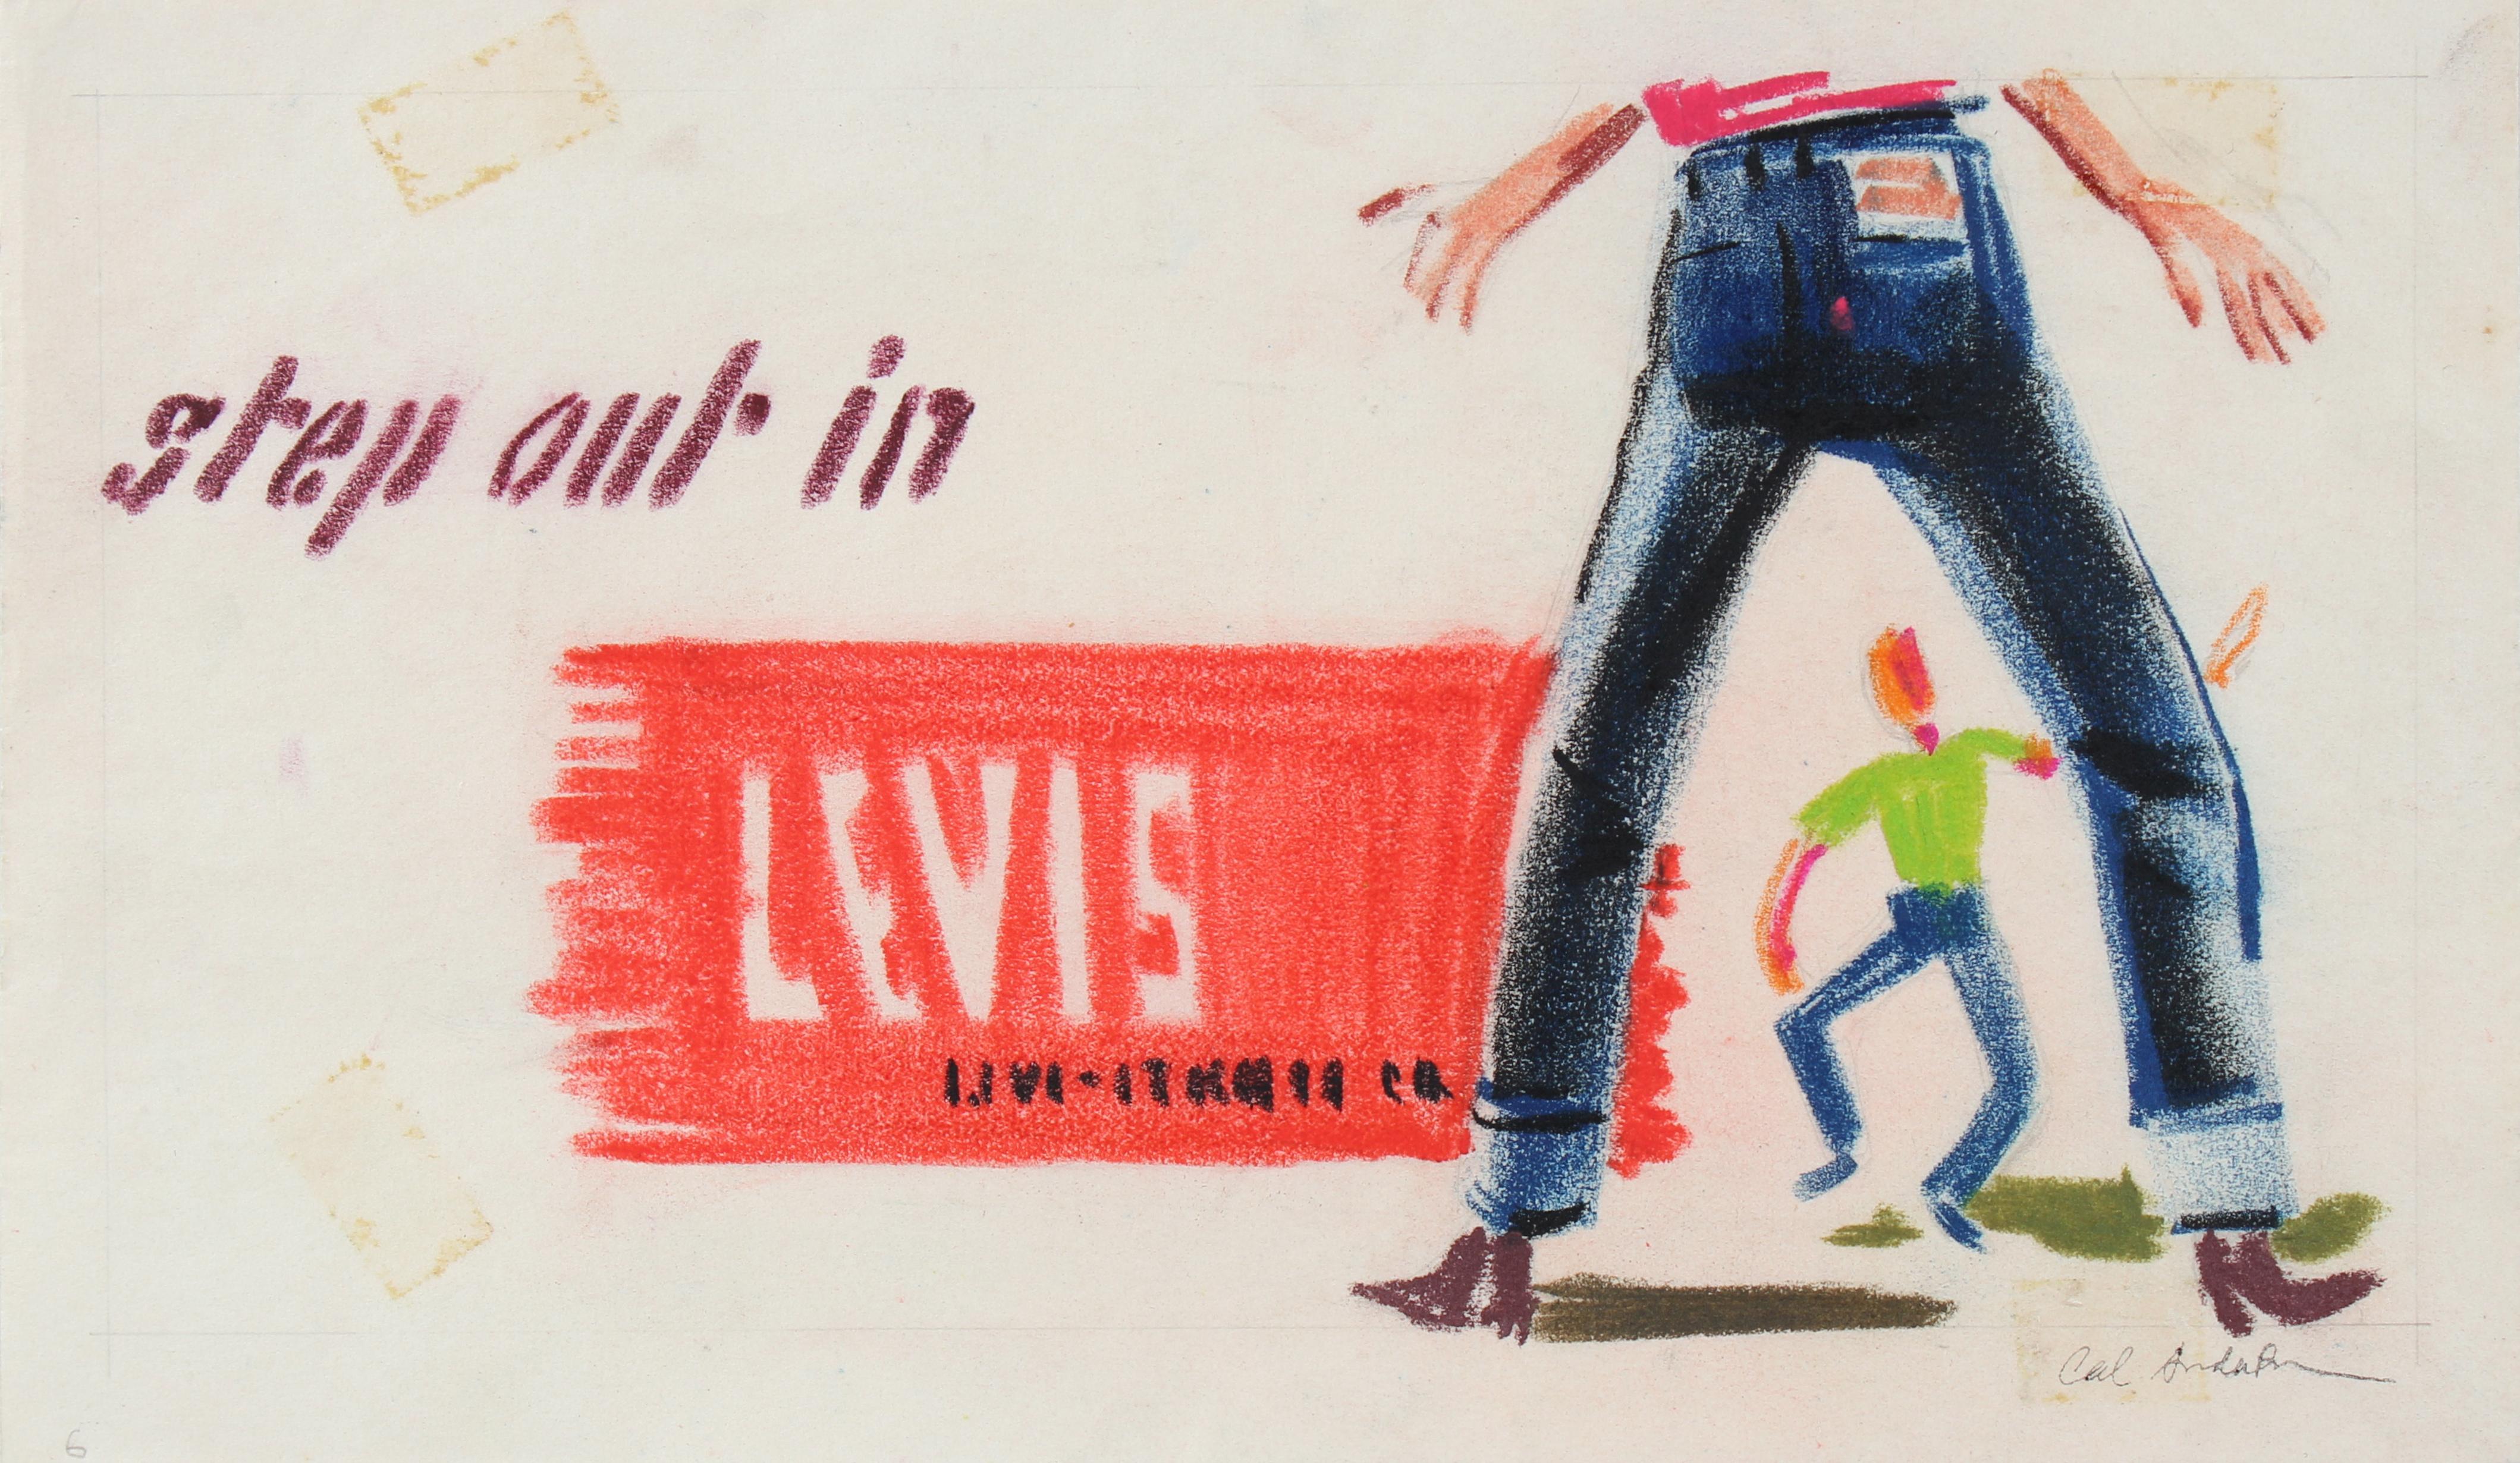 Calvin Anderson Figurative Art - "Step out in Levi's" 20th Century Pastel